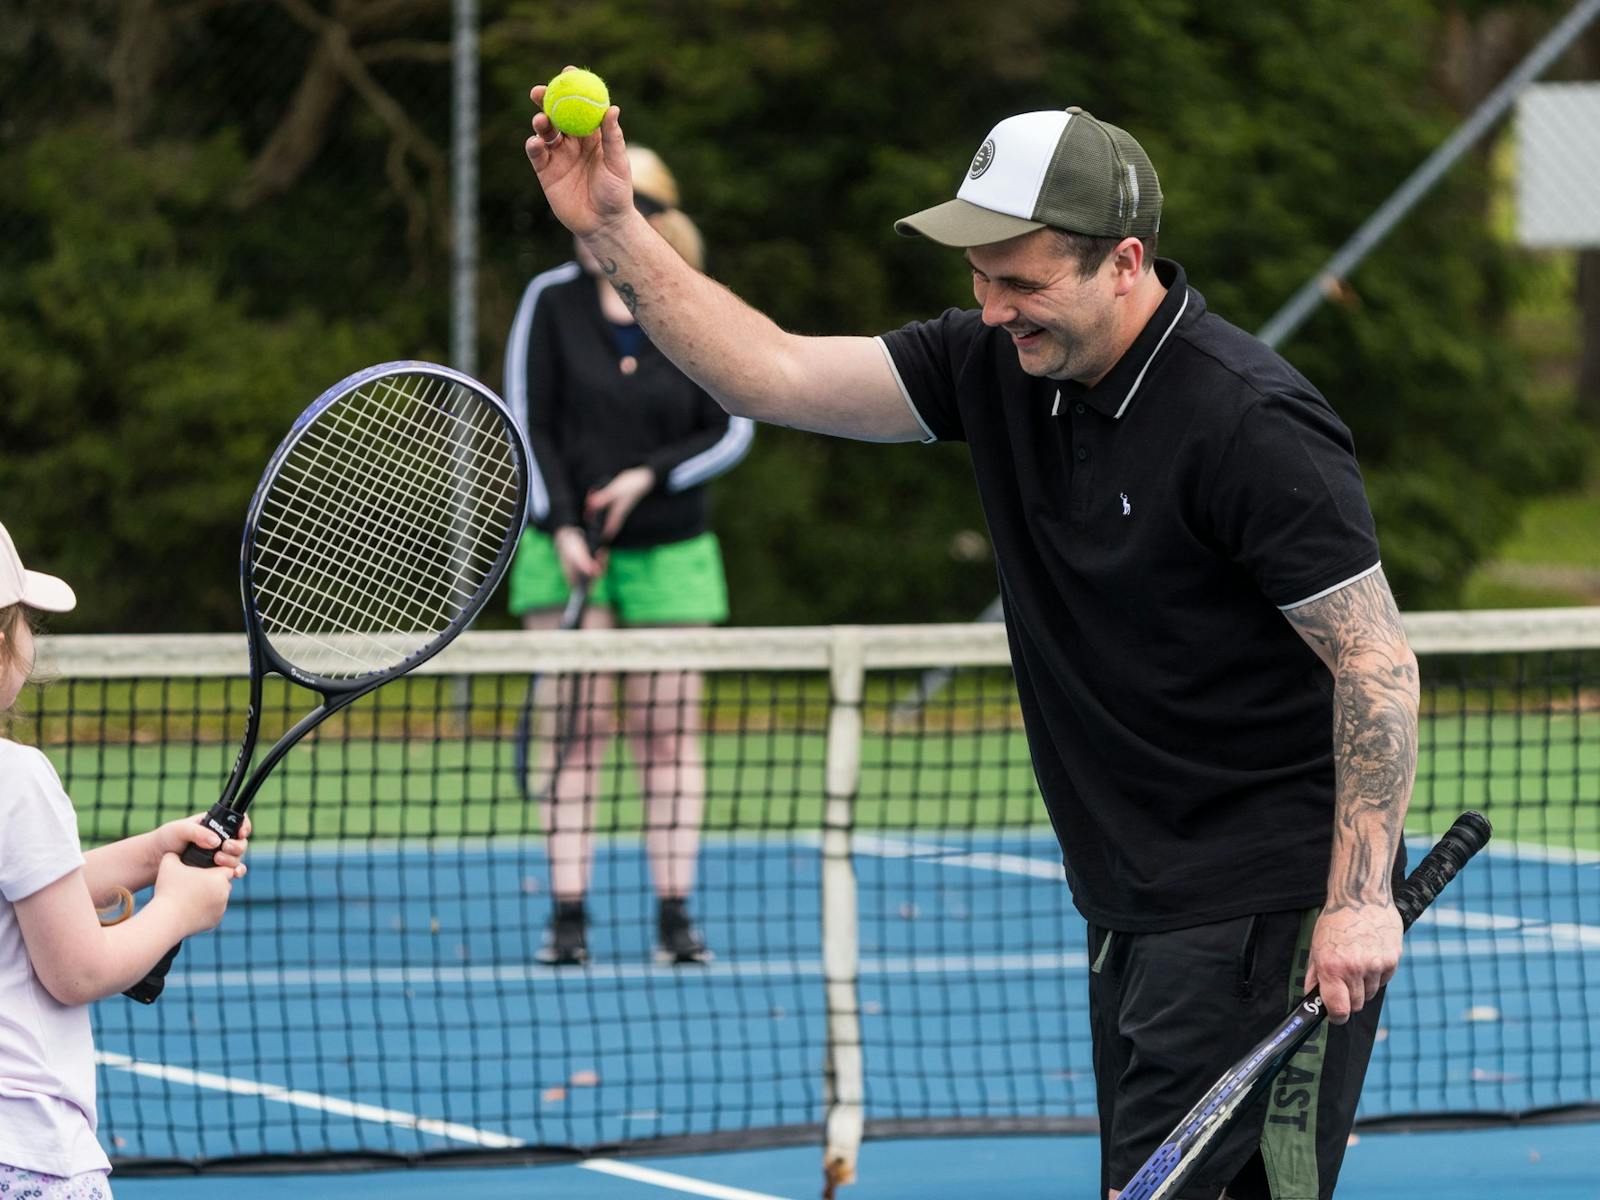 Father smiling as he shows his young daughter how to hit a tennis ball on our tennis courts